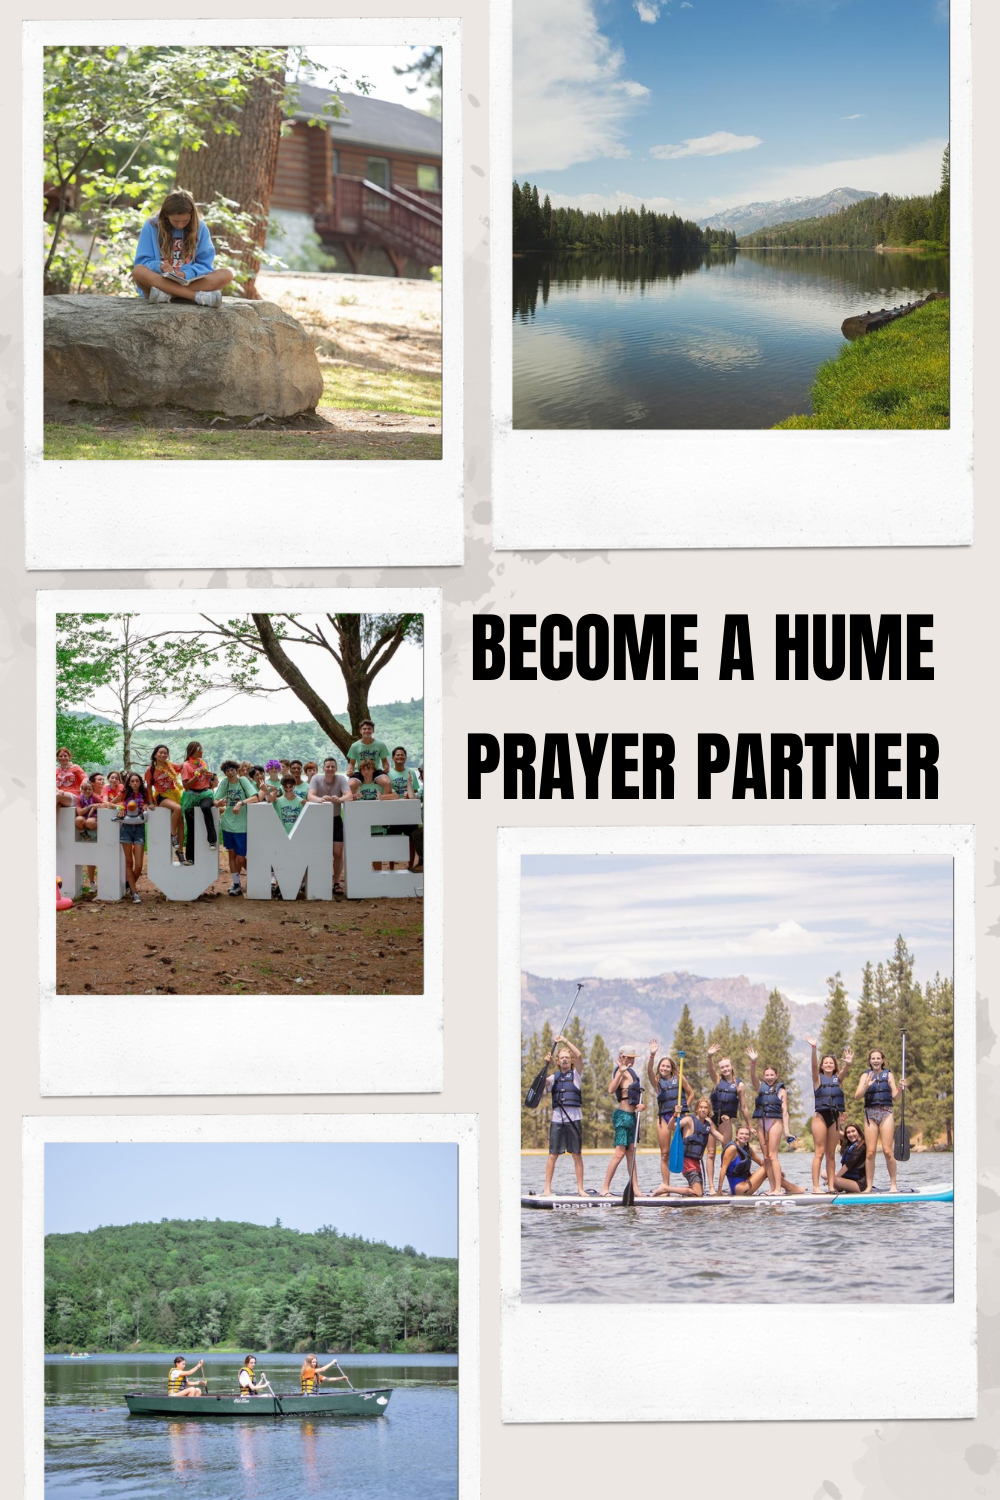 Become a Hume Prayer Partner!